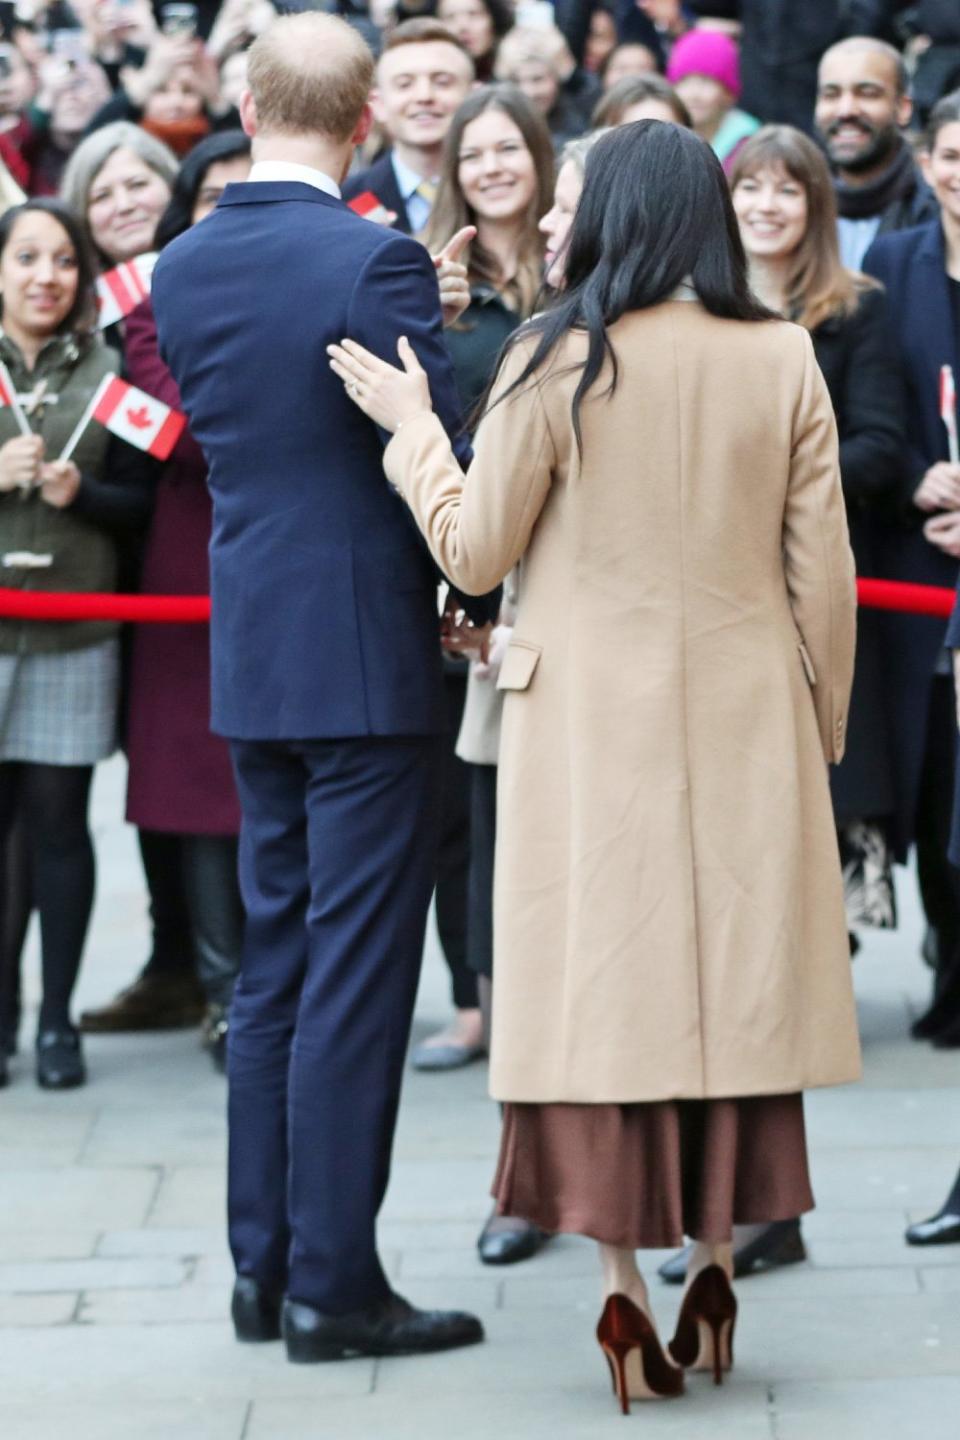 The affectionate couple stayed close as they greeted the crowd, with Meghan placing a hand on her husband's back.